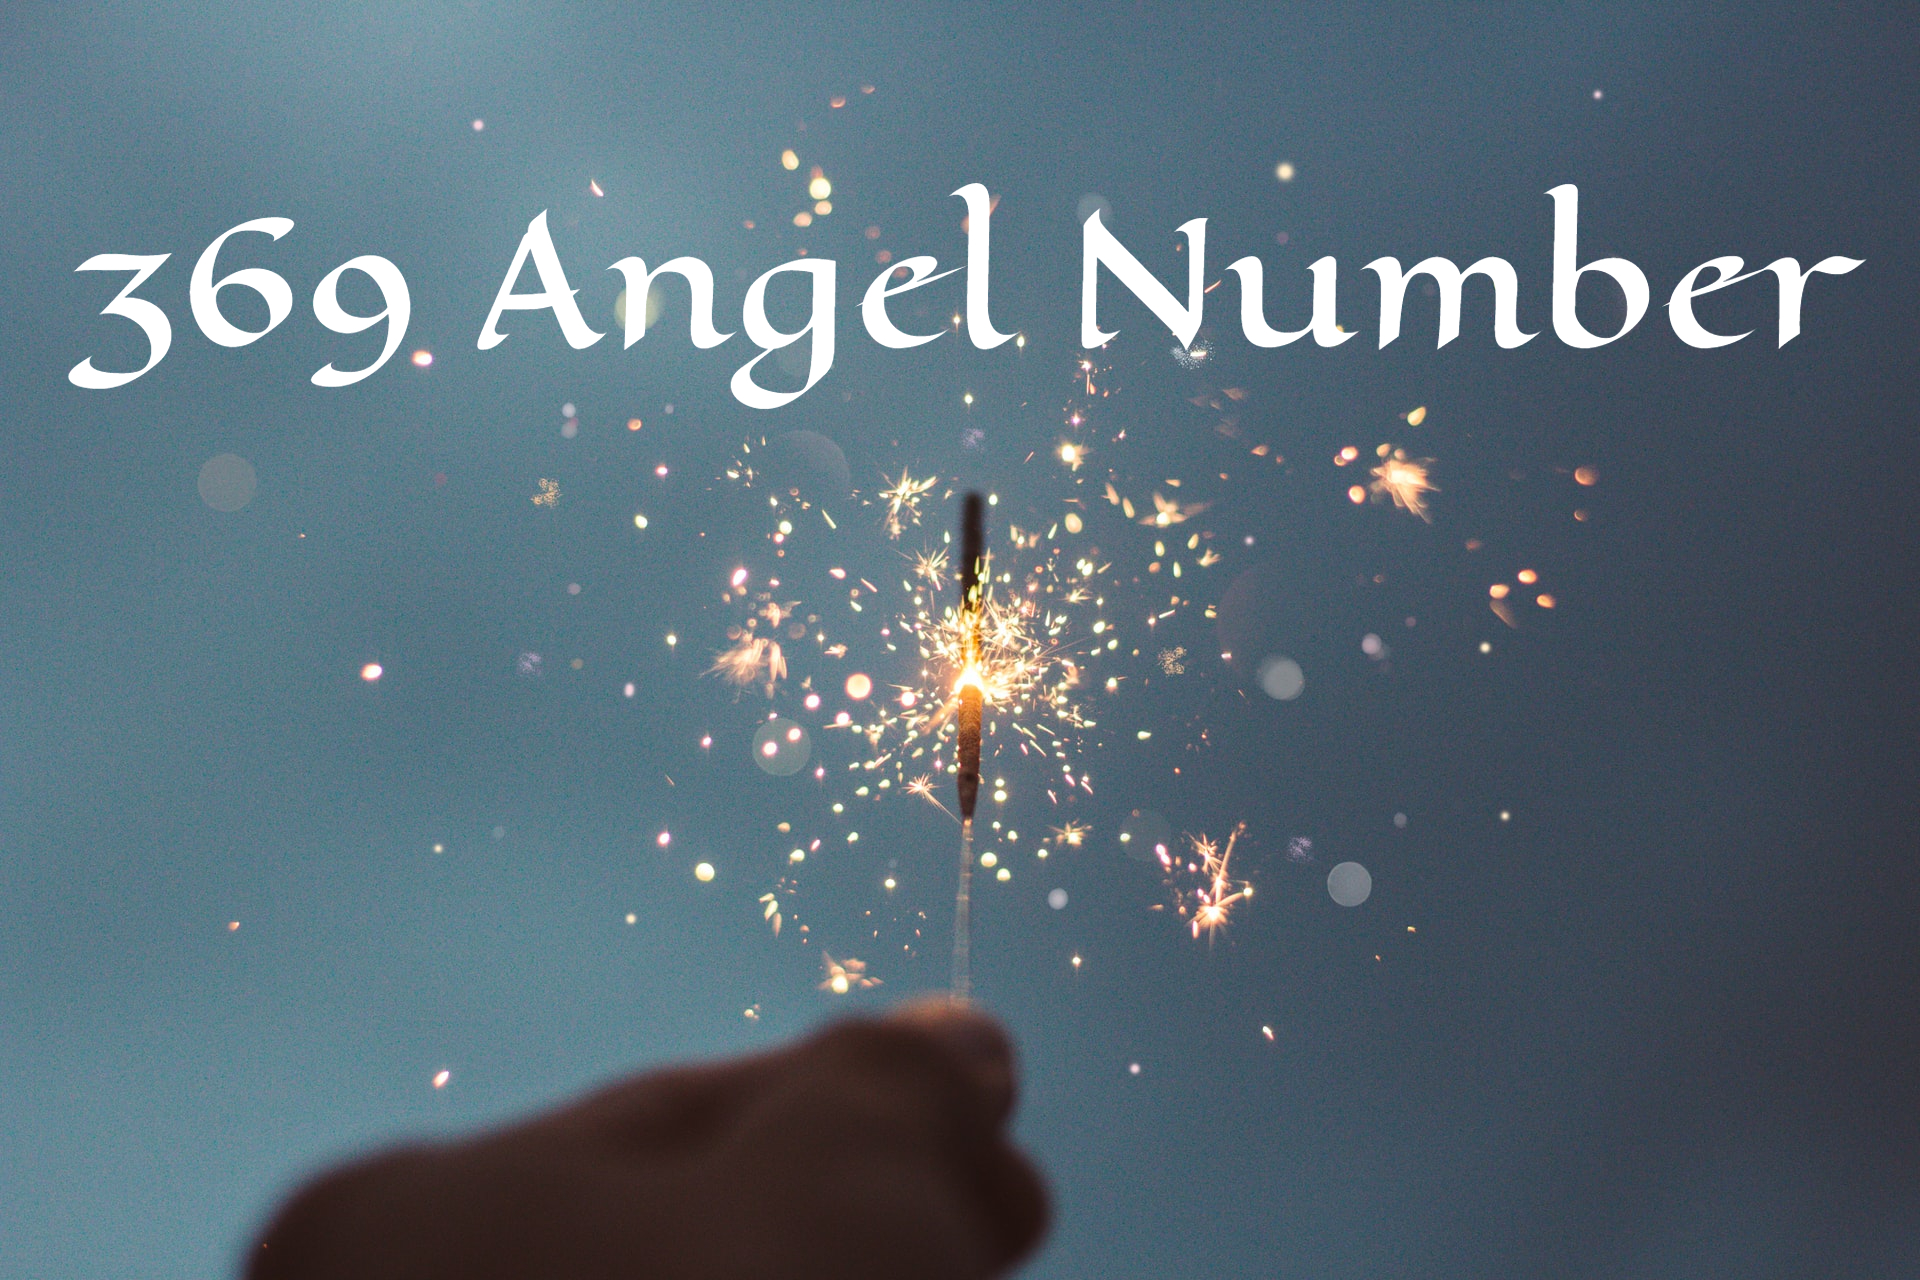 369 Angel Number - Happiness, Achievement, And Contentment